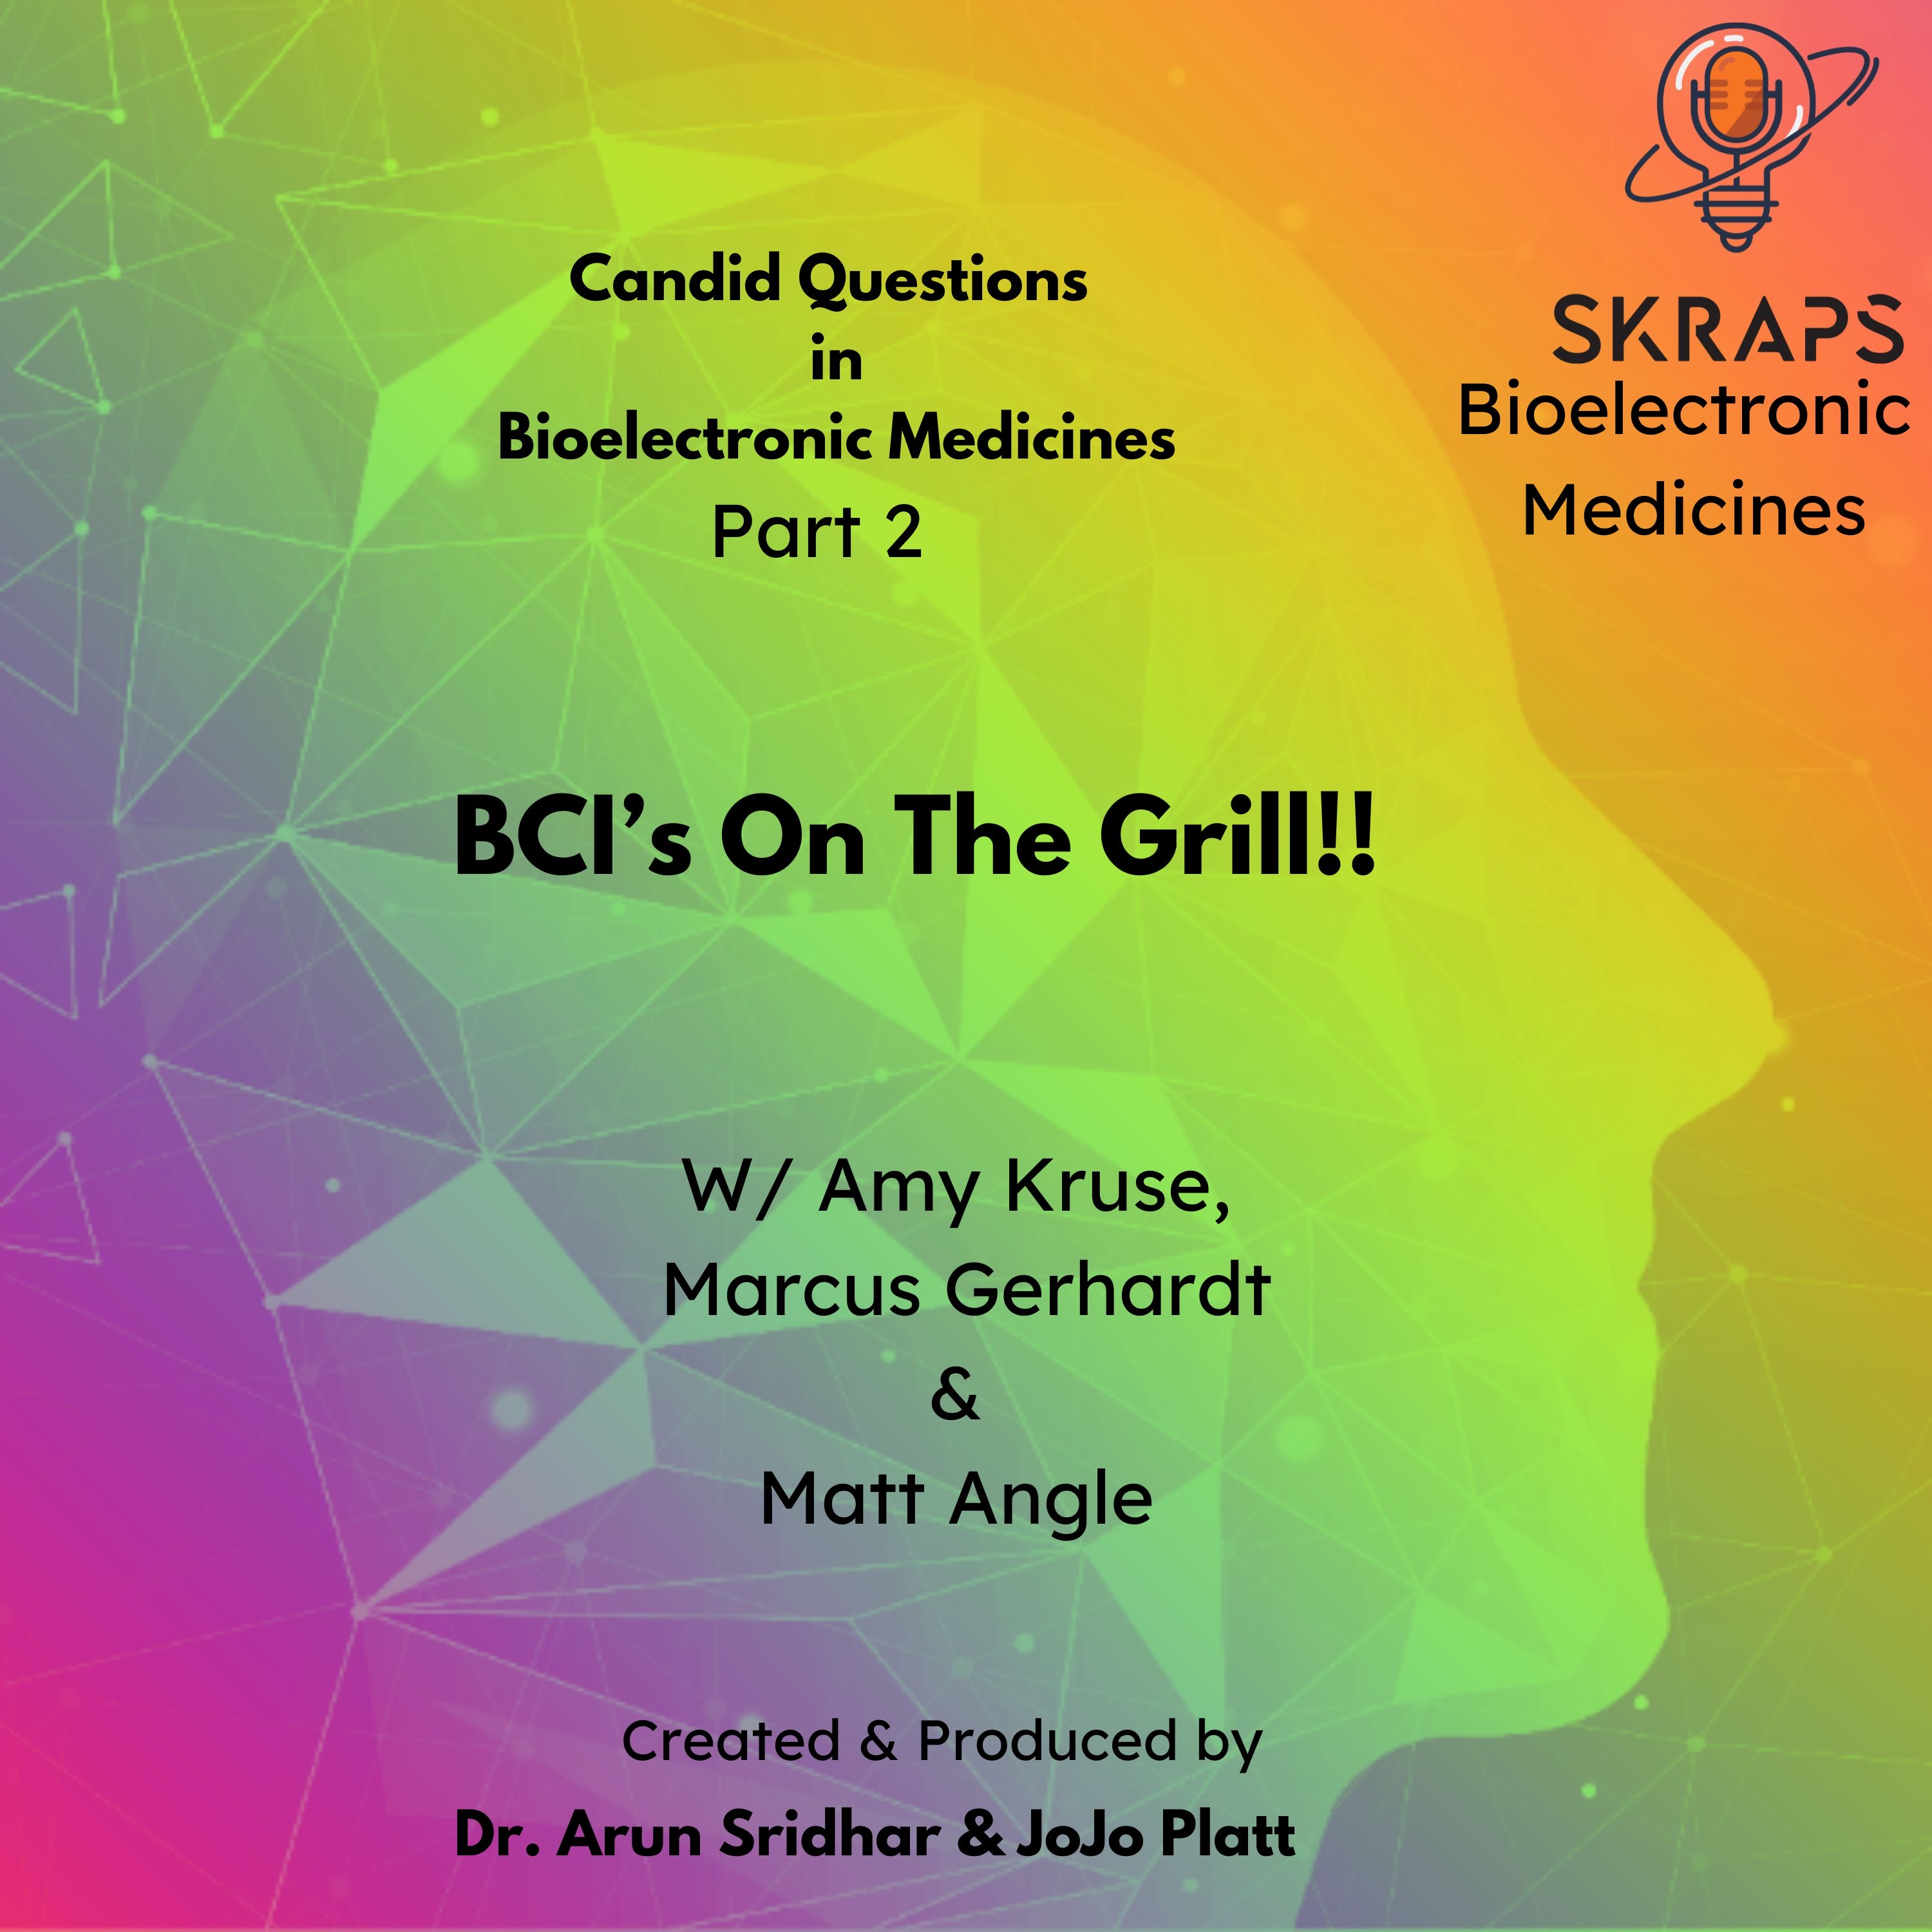 BCI’s On The Grill 🥩 - Candid Questions in Bioelectronic Medicines (Part 2)